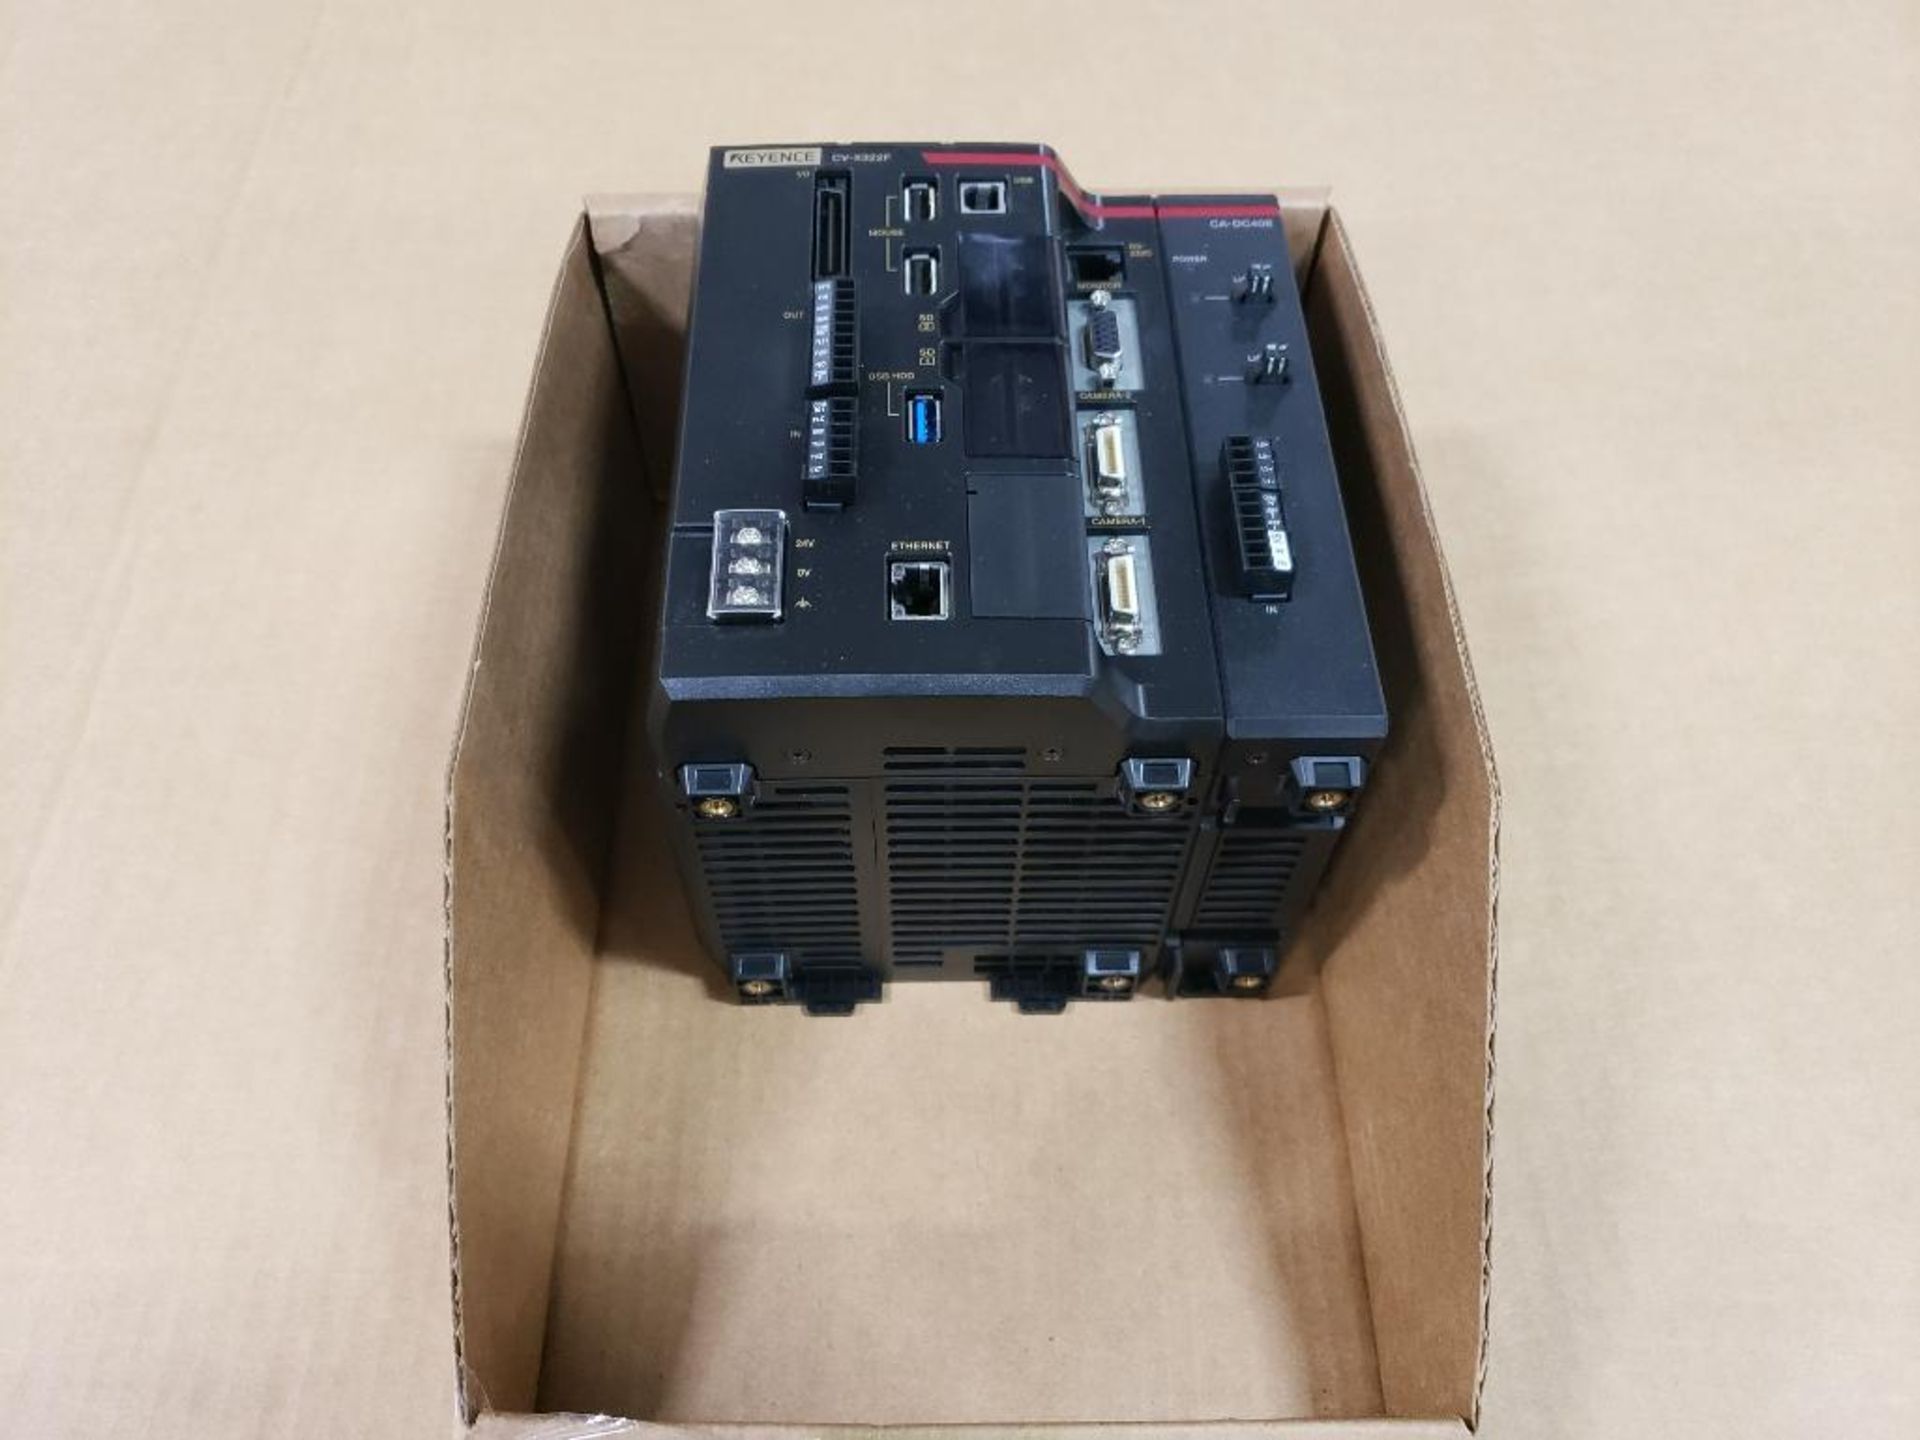 Keyence vision system controller. Part number CV-X322F with sub part CA-DC40E.